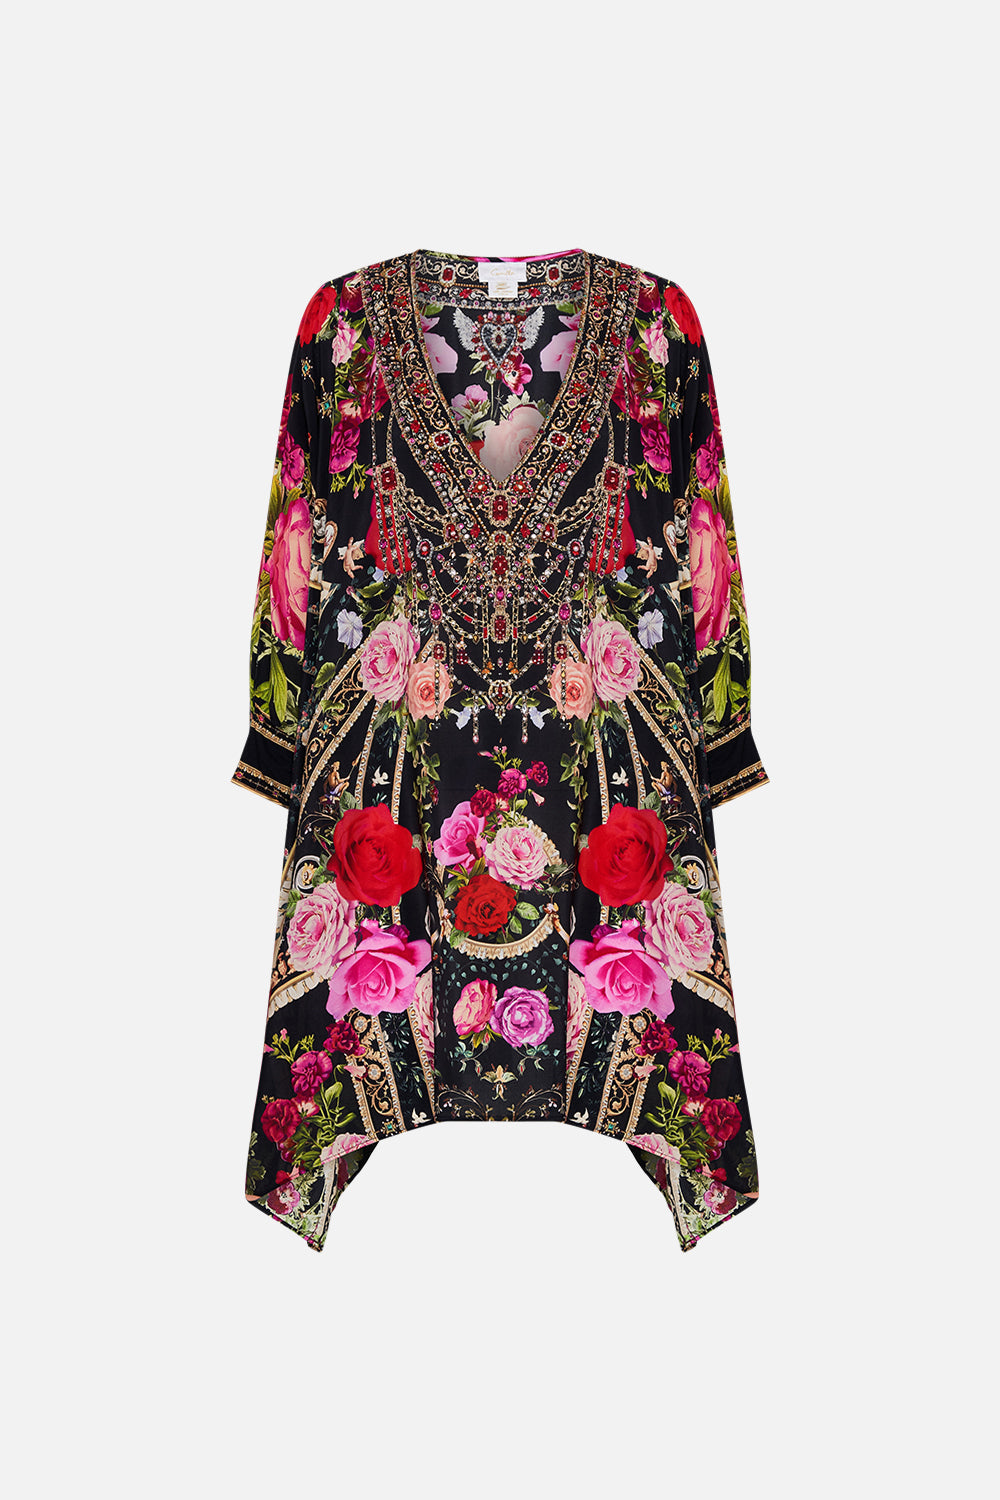 Product view of  CAMILLA short kaftan in Reservation For Love print